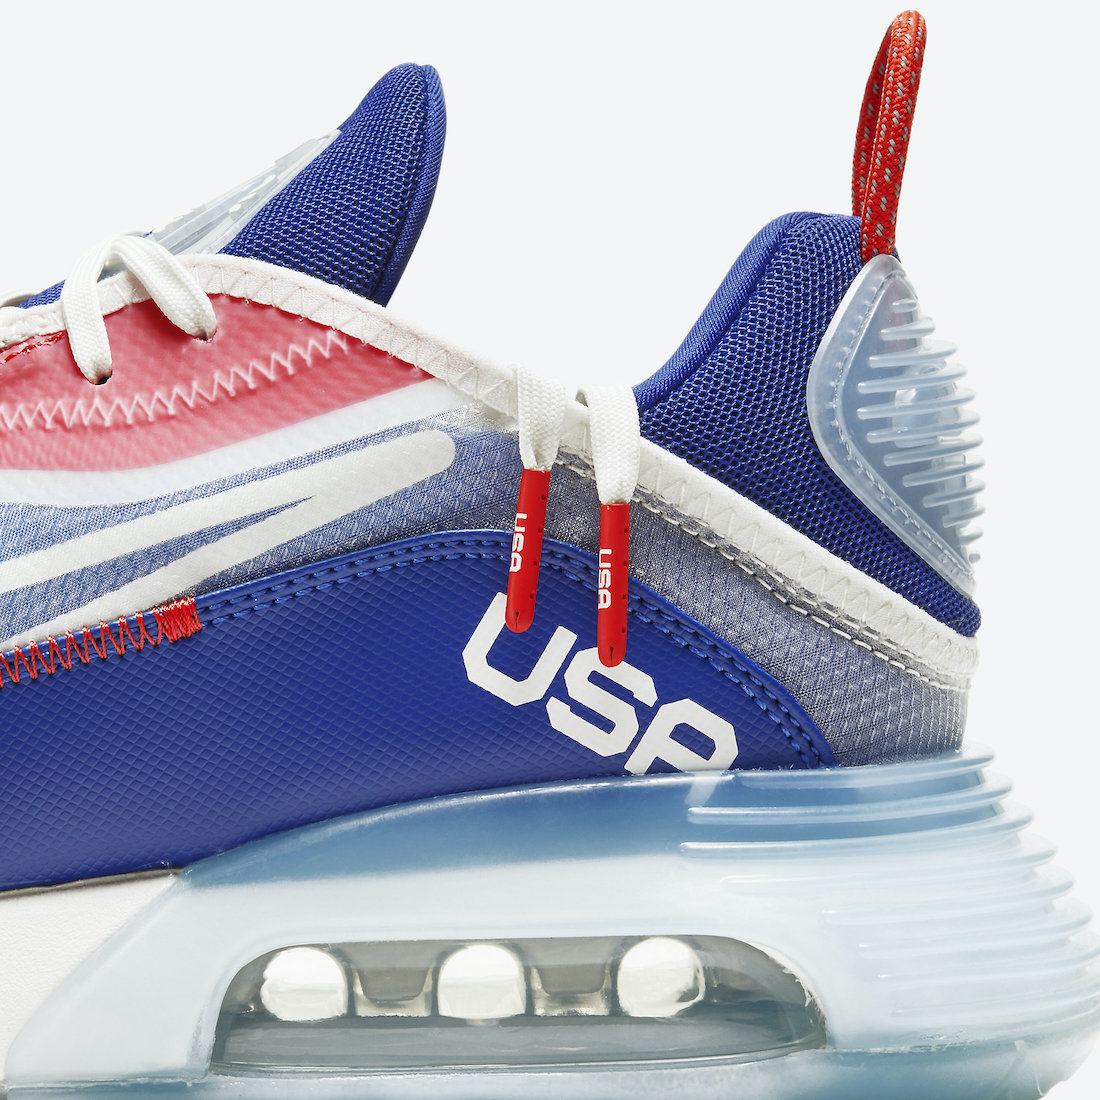 Nike Air Max 2090 USA CT2010-100 Release Date